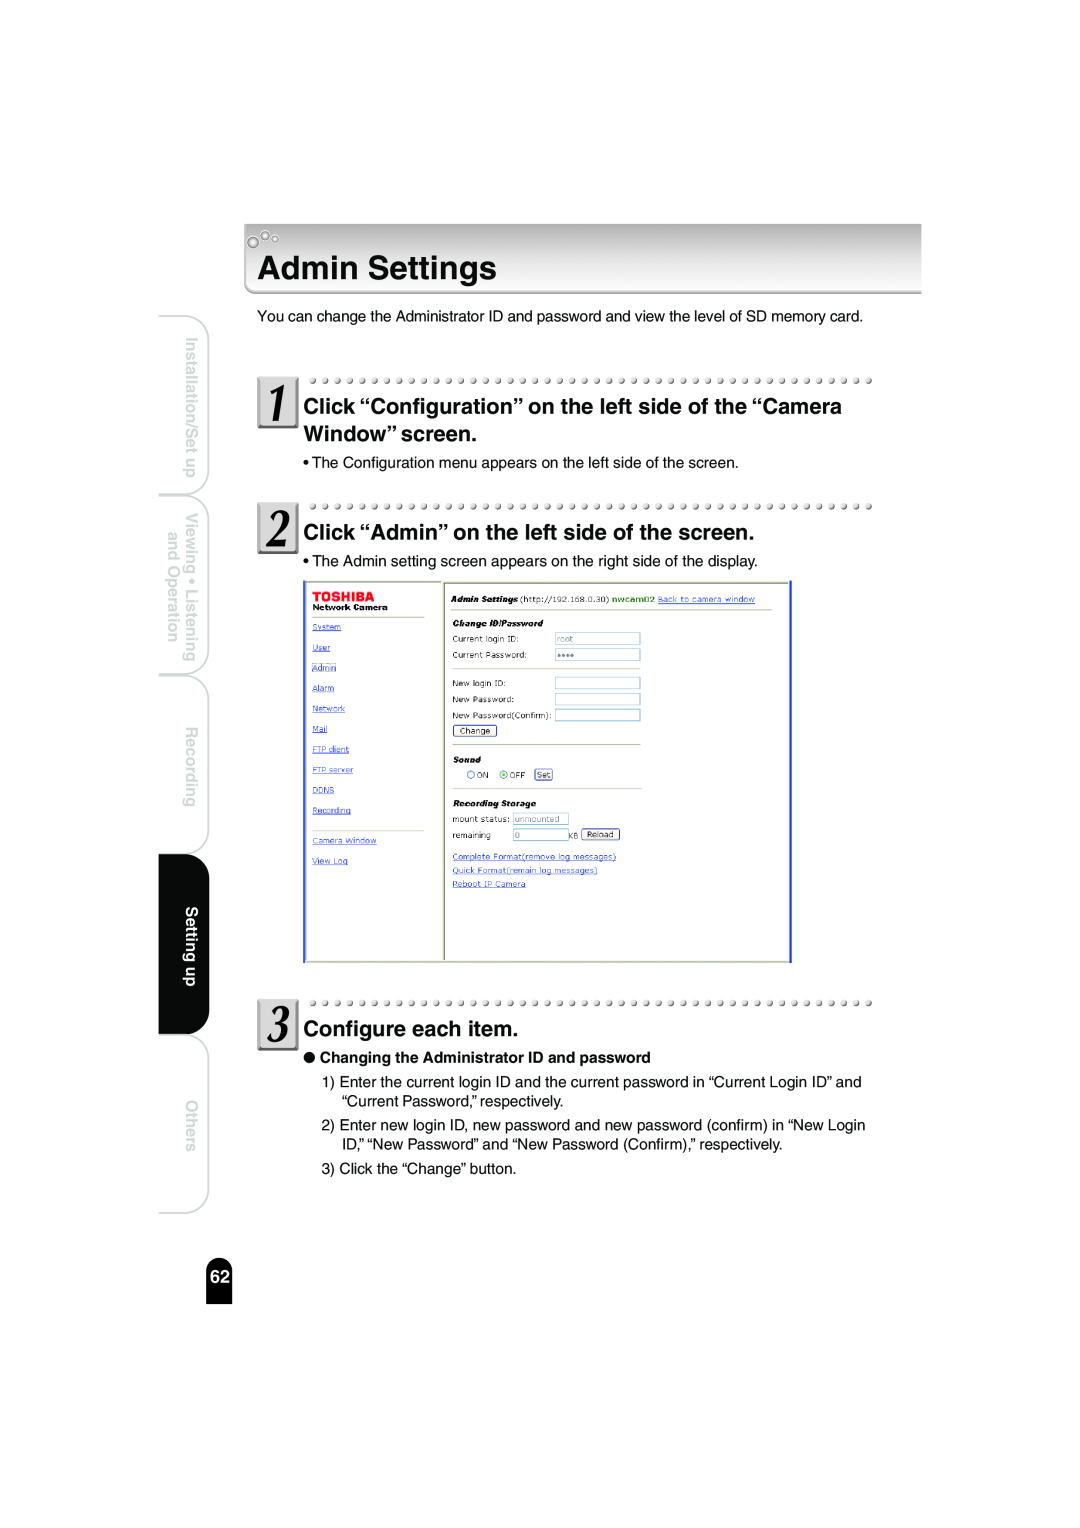 Toshiba IK-WB02A Admin Settings, Changing the Administrator ID and password, Click “Admin” on the left side of the screen 